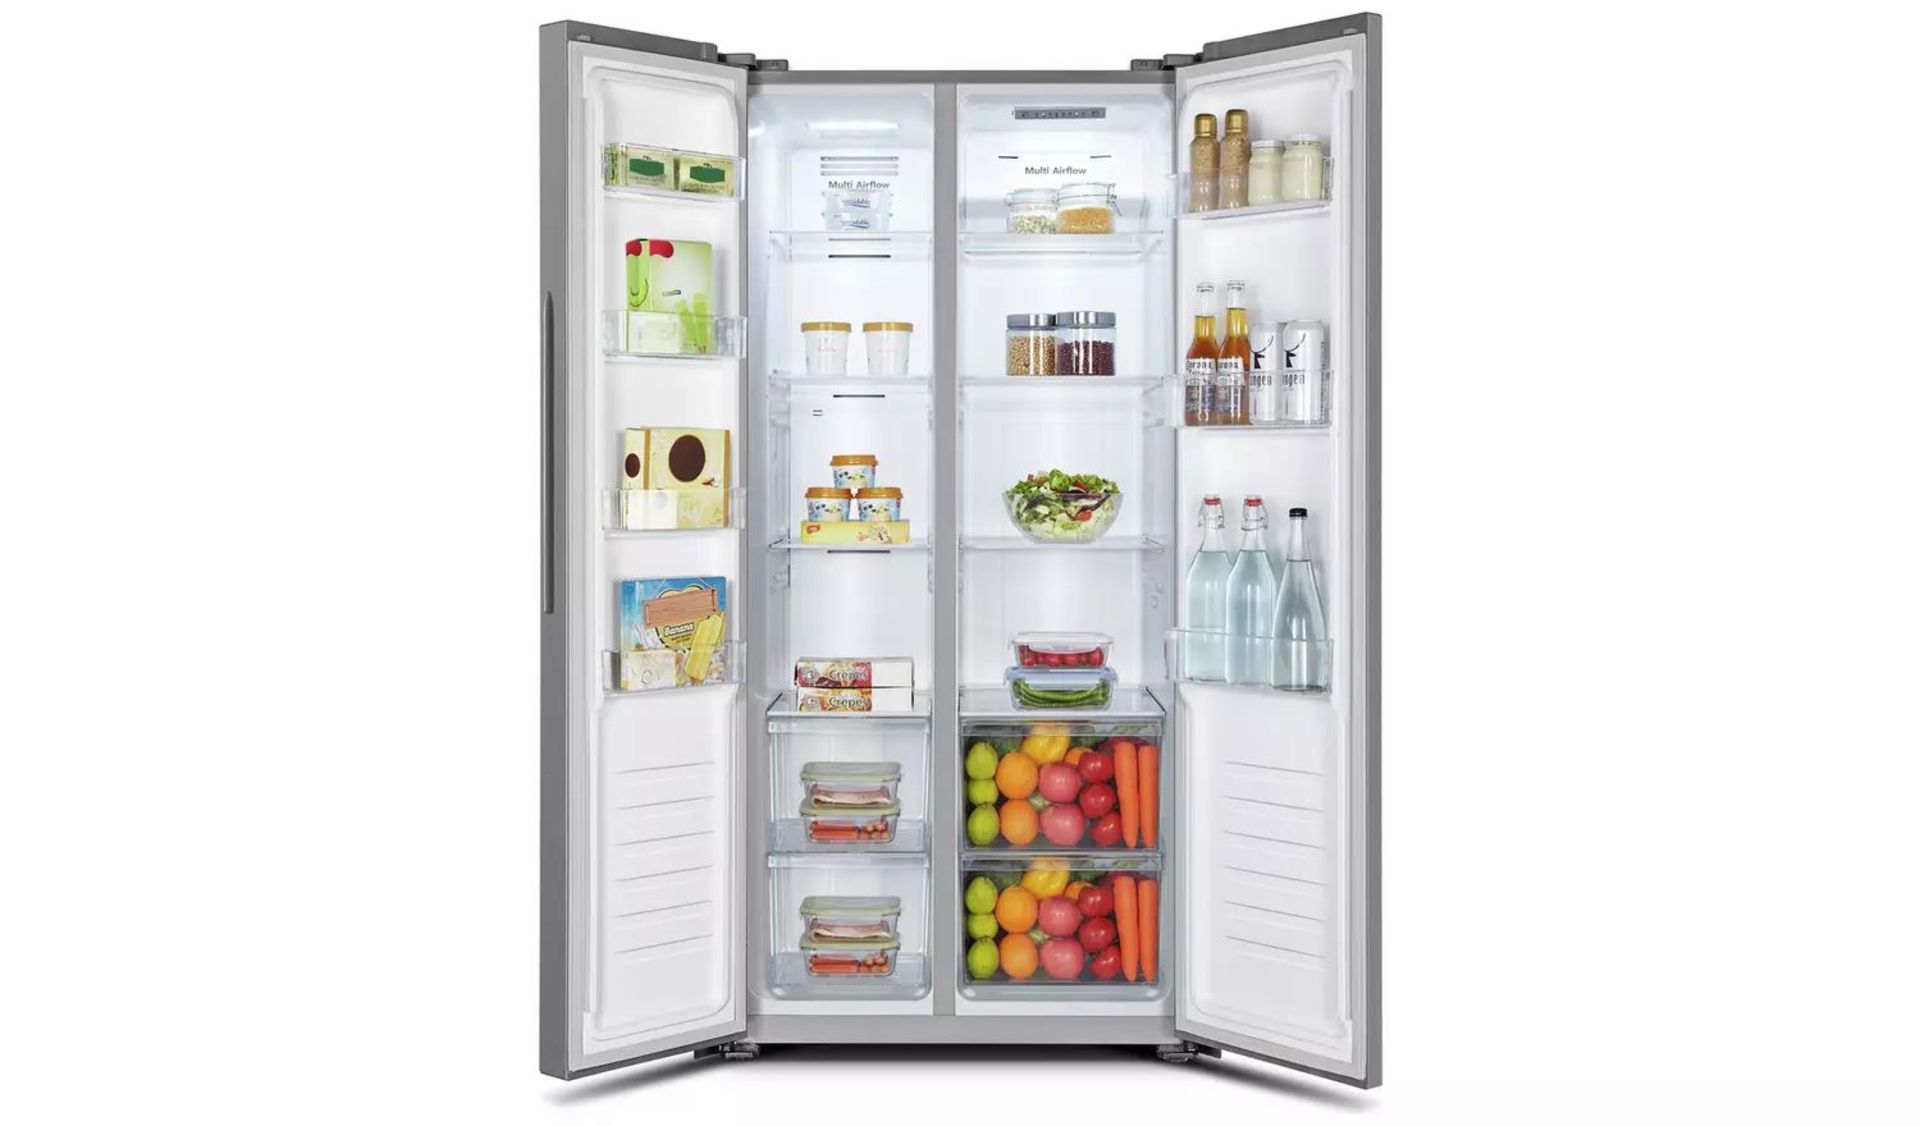 Fridgemaster MS83430ES American Fridge Freezer - Silver. - RRP £850.00. Packed with feature and an - Image 2 of 2